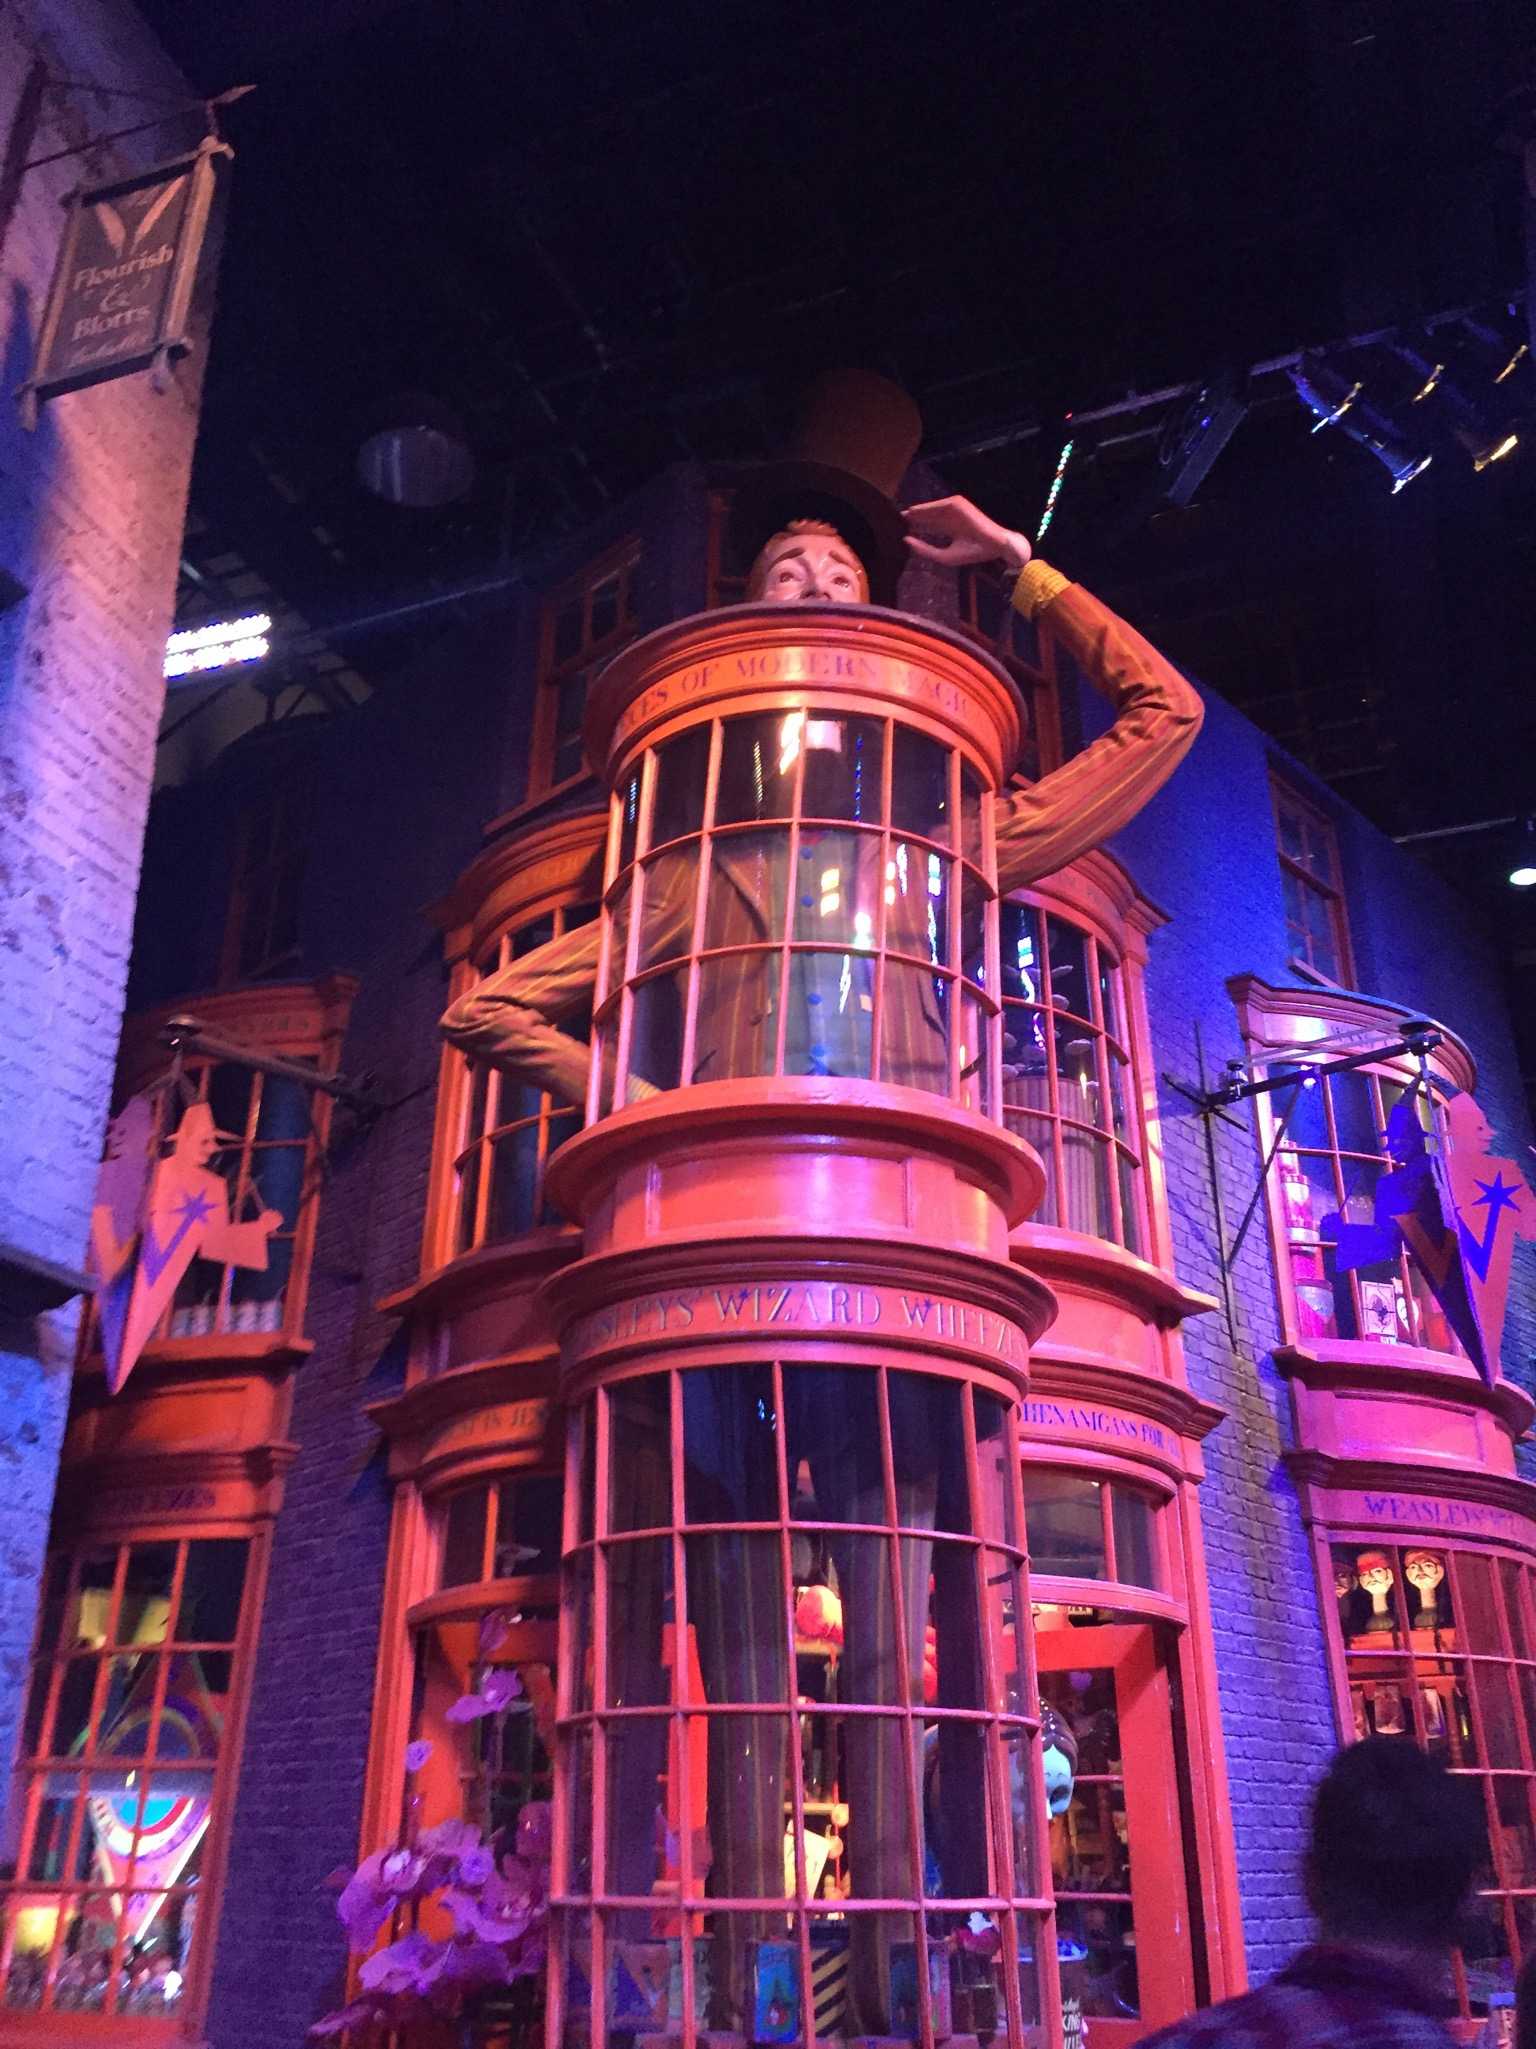 JOKE'S ON YOU: If you want to prank your new classmates, then Weasley's Wizard Wheezes is the place to satisfy your pranking desires.